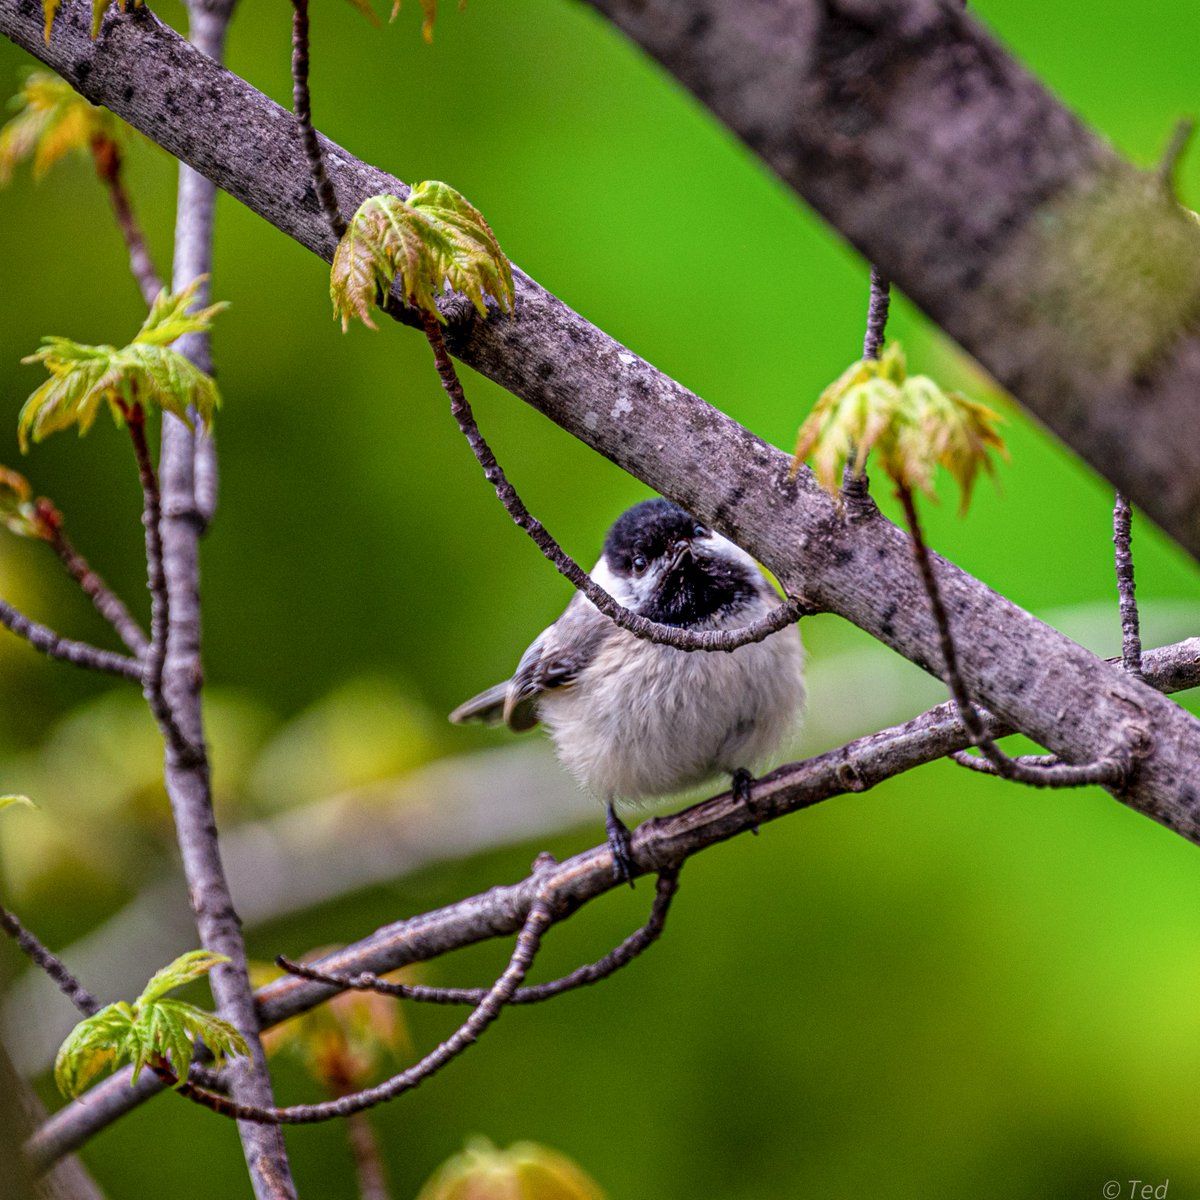 A Black-Capped Chickadee, looking back at me. 
Have a Delightful rest of the day everyone. ✌️
#Nature  #photographylovers  #Birdphotography